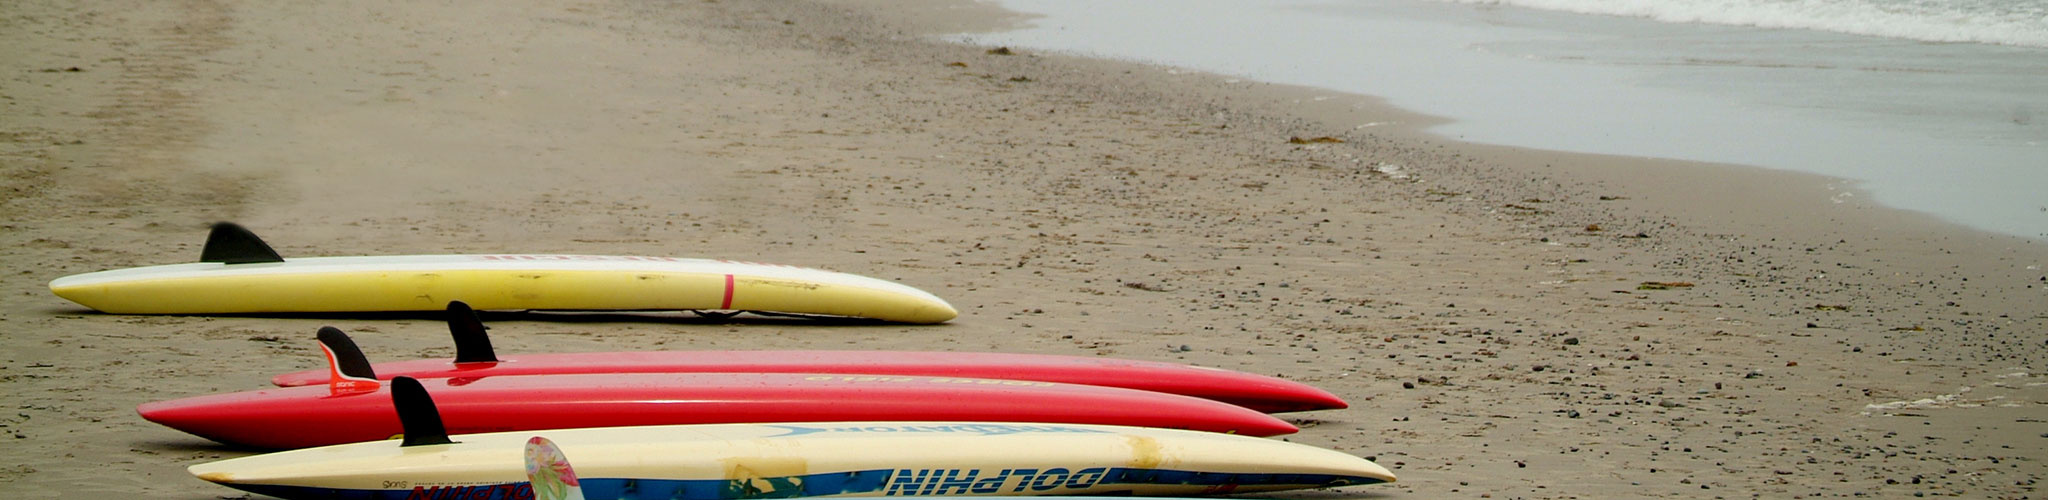 Group of surfboards lined up on the beach